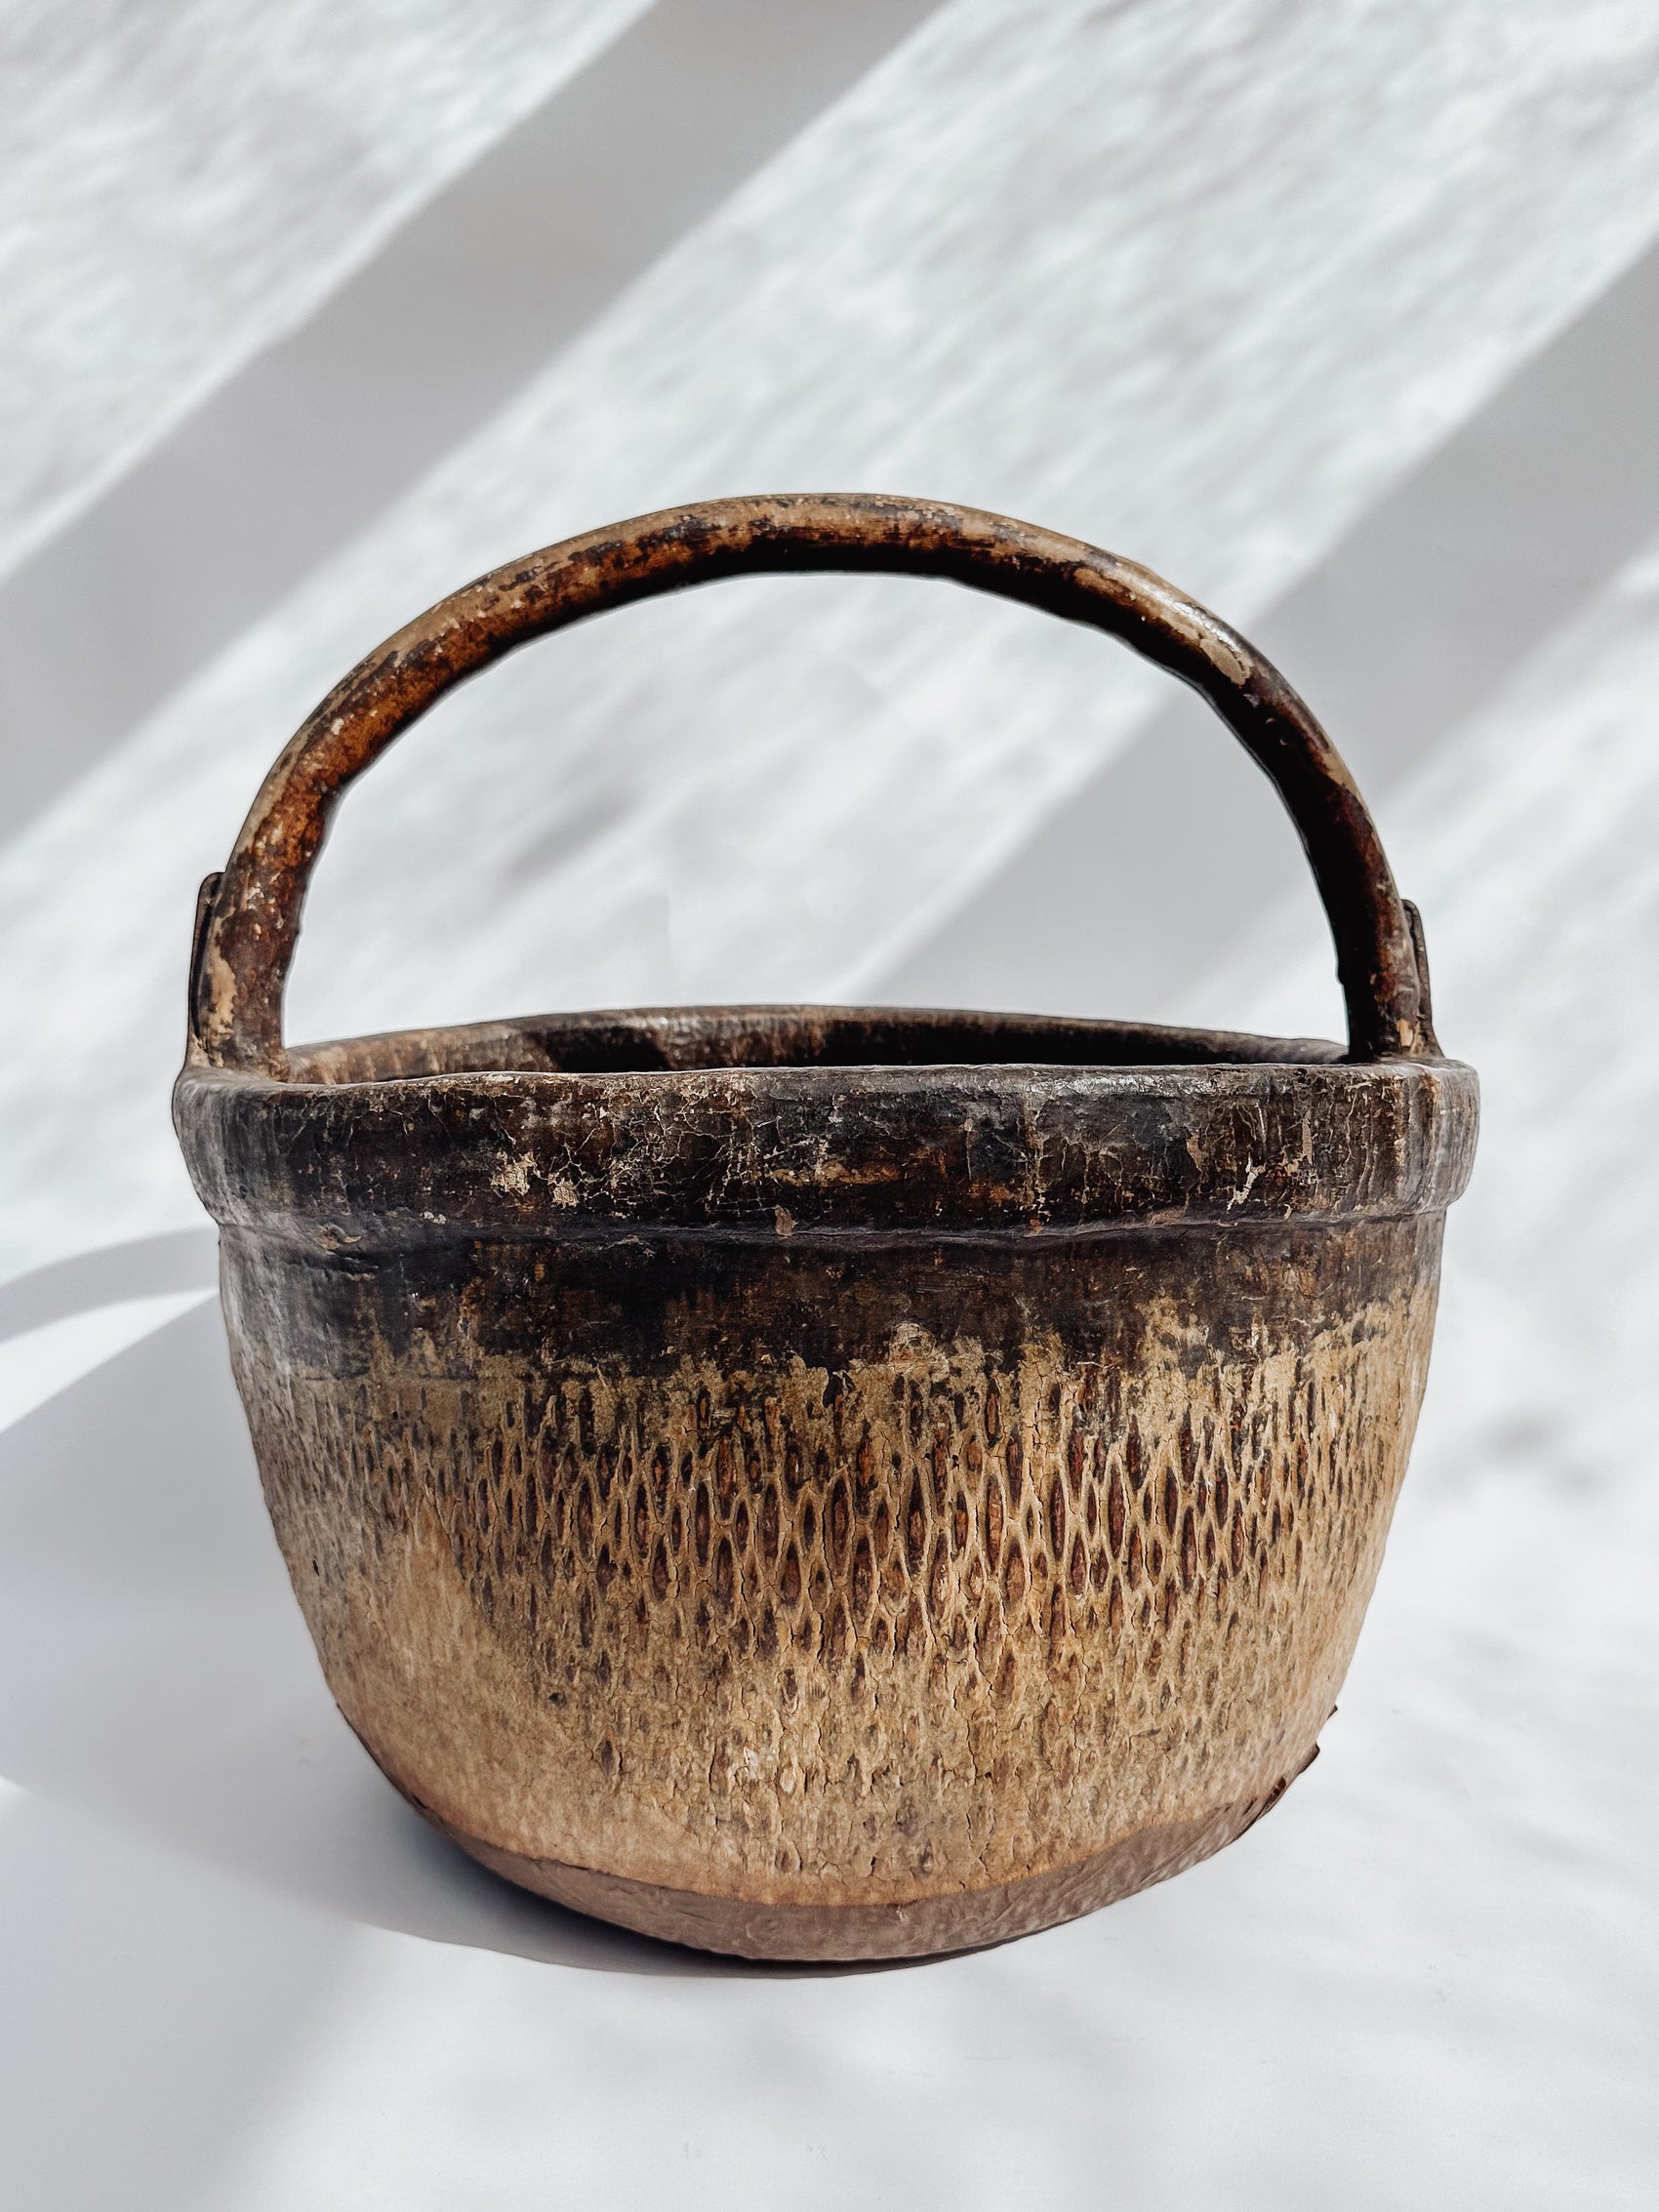 Old Chinese wicker basket XL